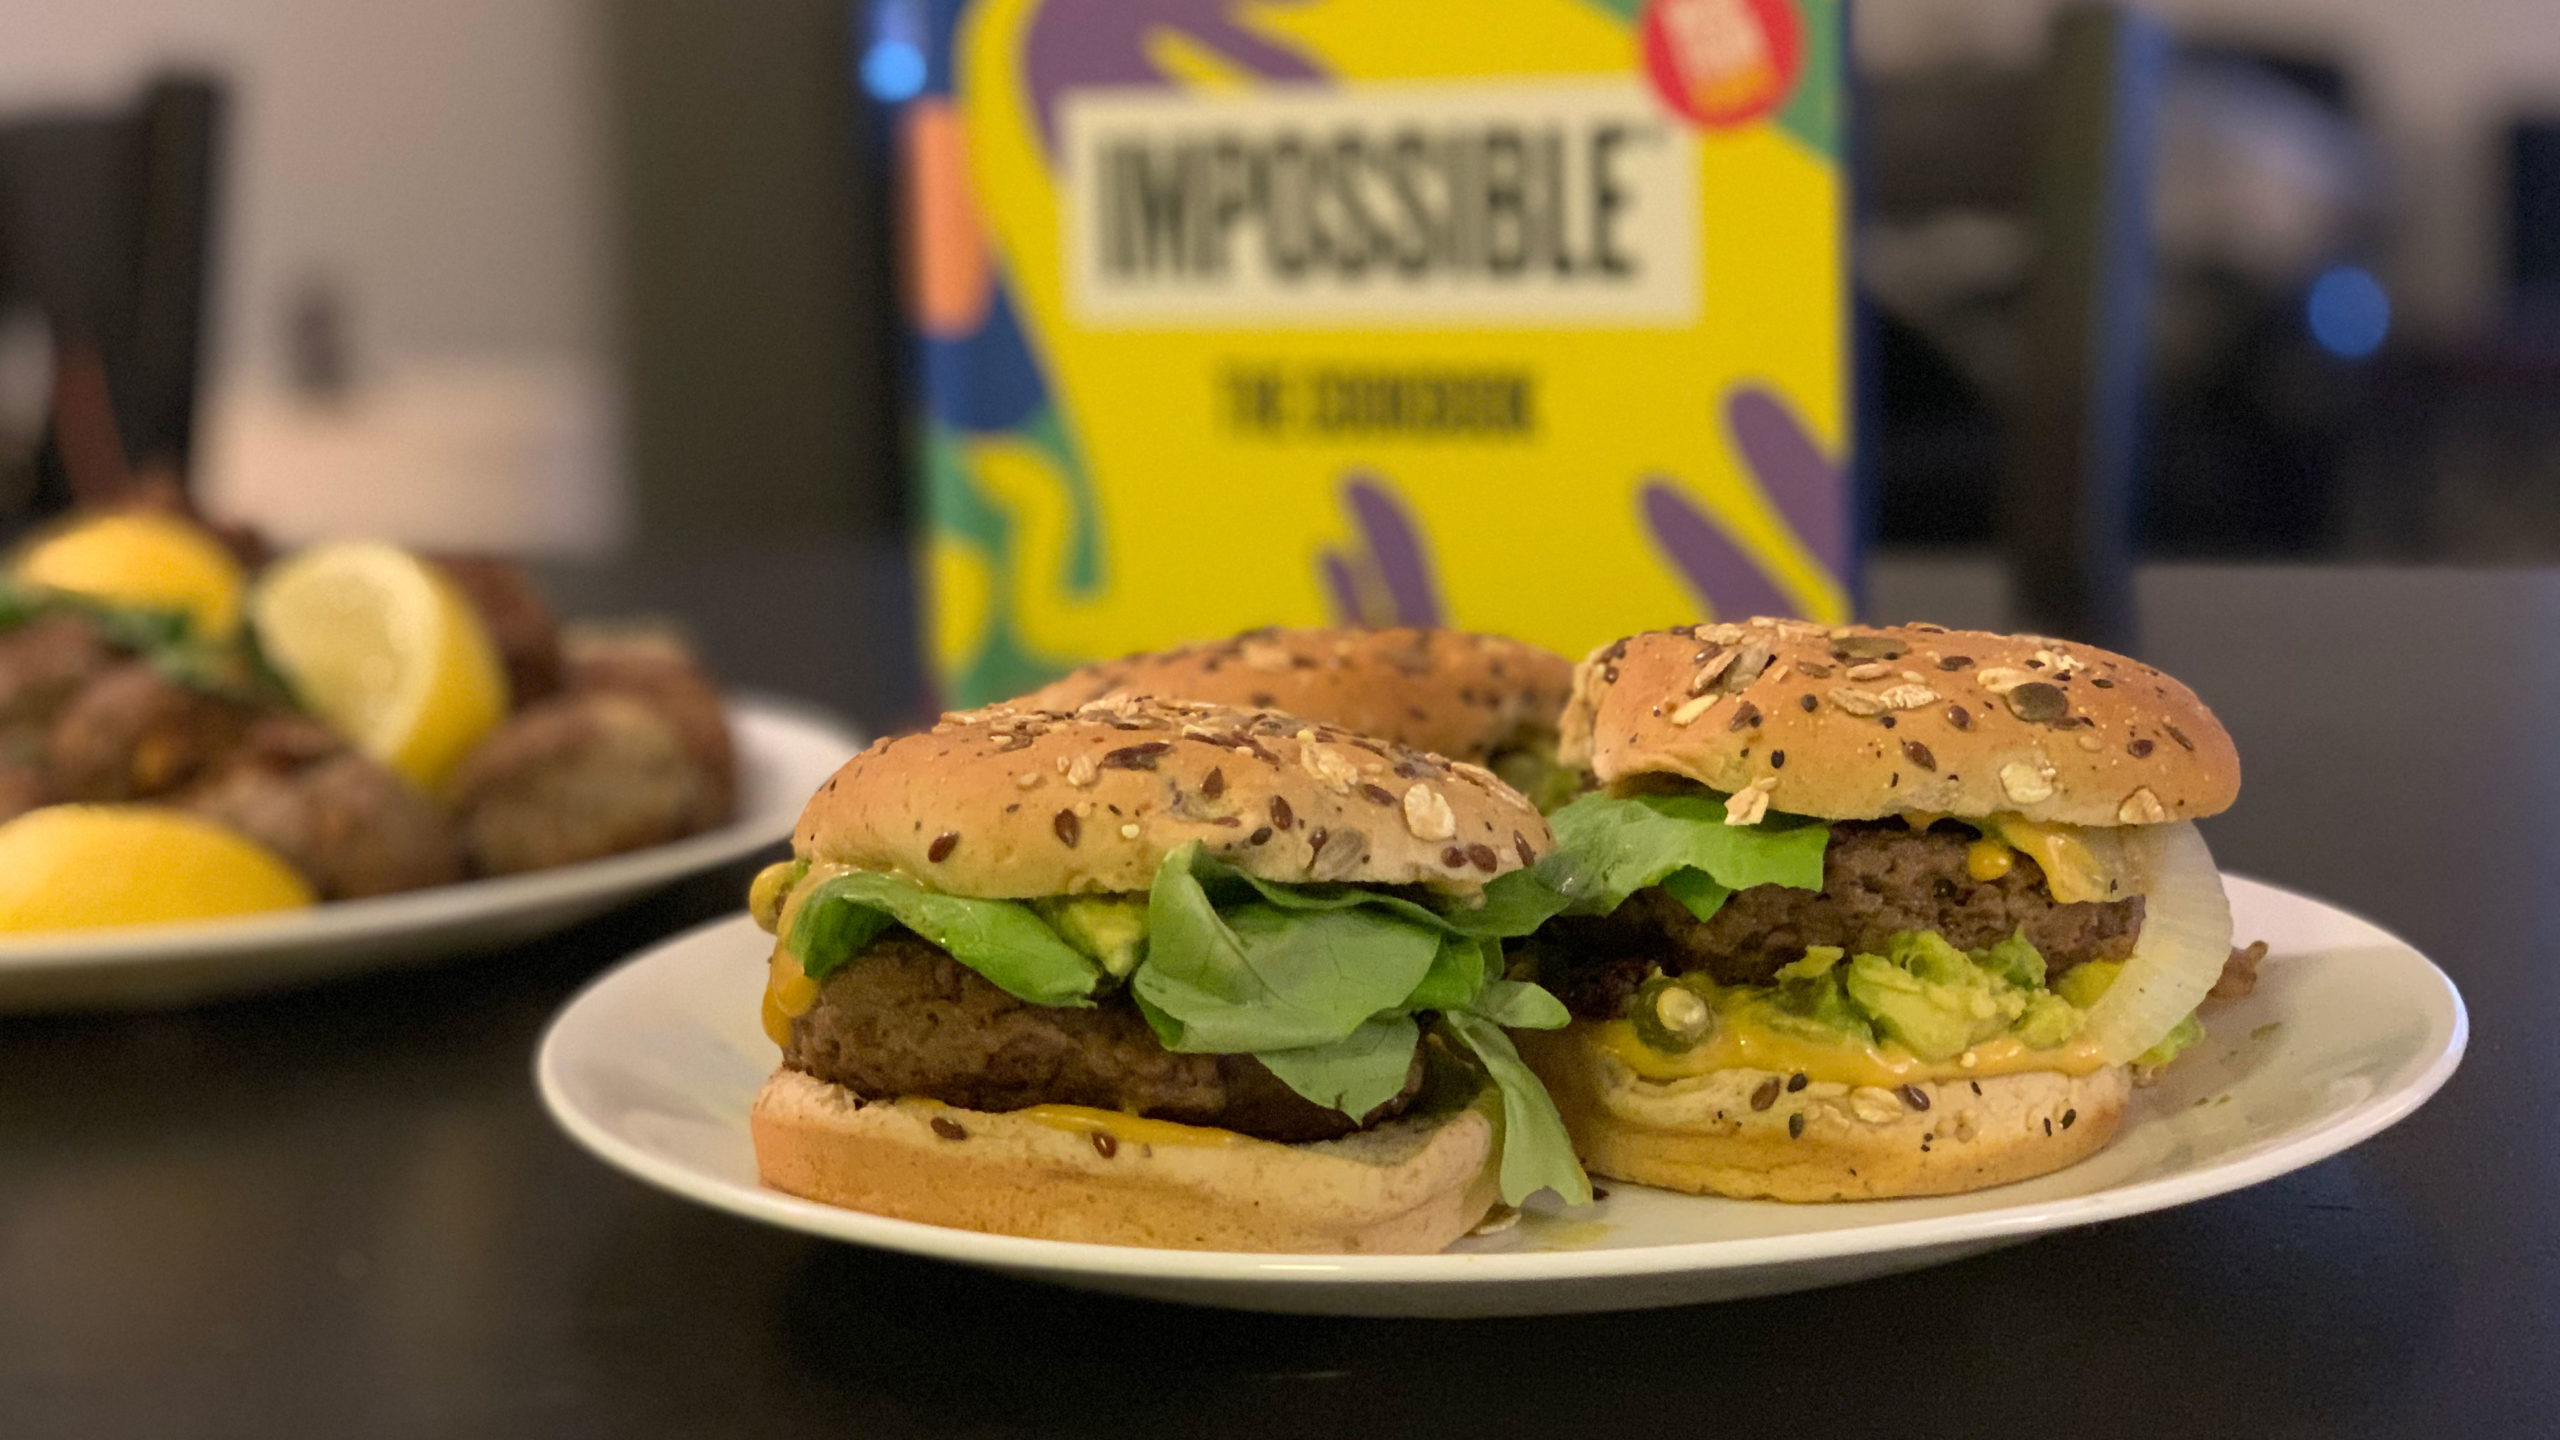 They're not beautiful, but they tasted good, and I also have never made burgers before in my life.  (Photo: Victoria Song/Gizmodo)